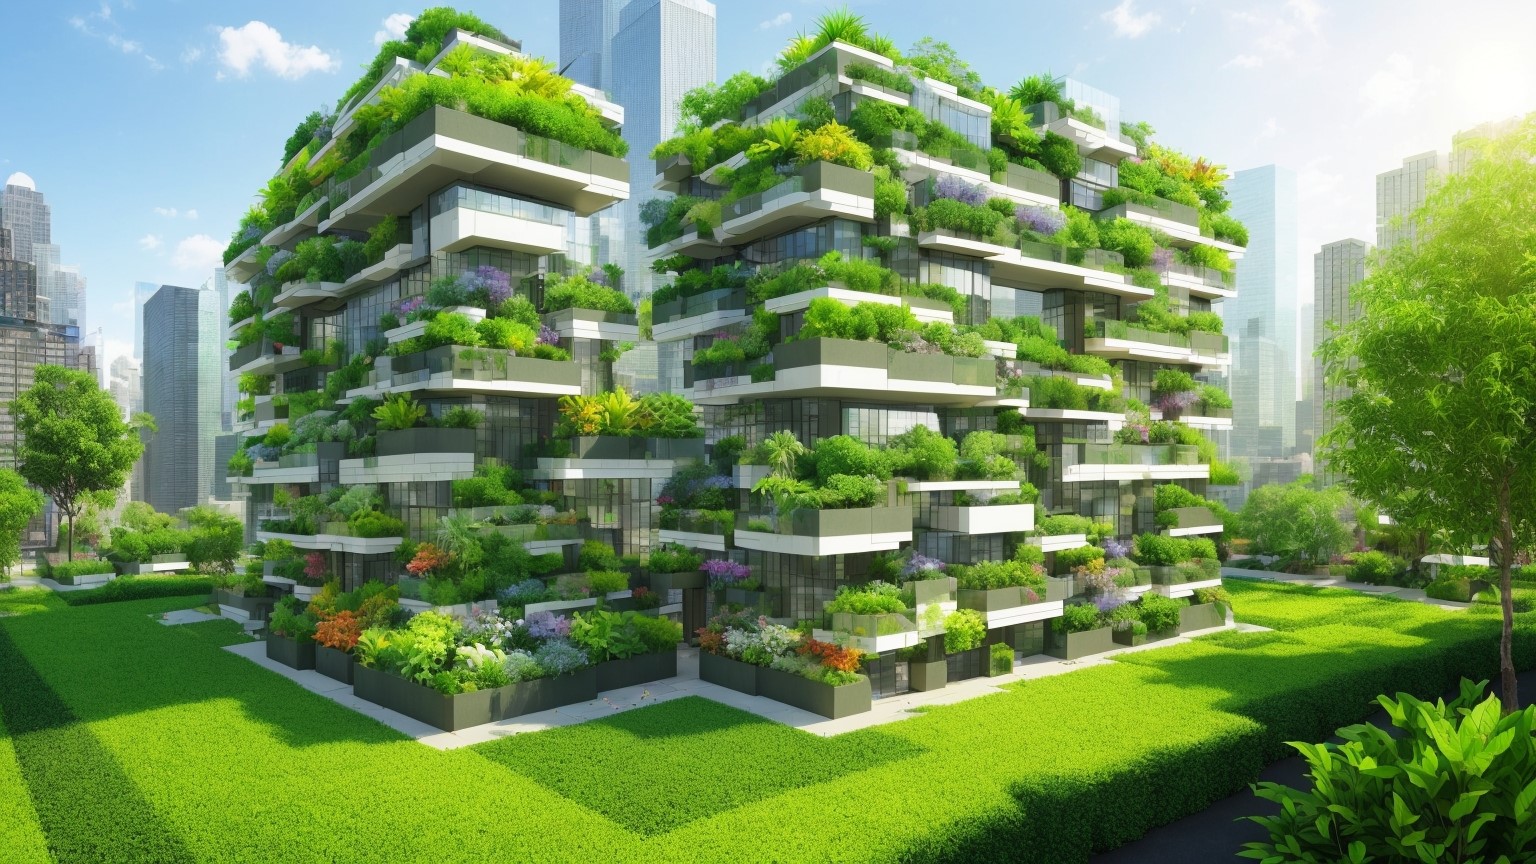 Creating Sustainable Urban Gardens with 3D Architectural Animation